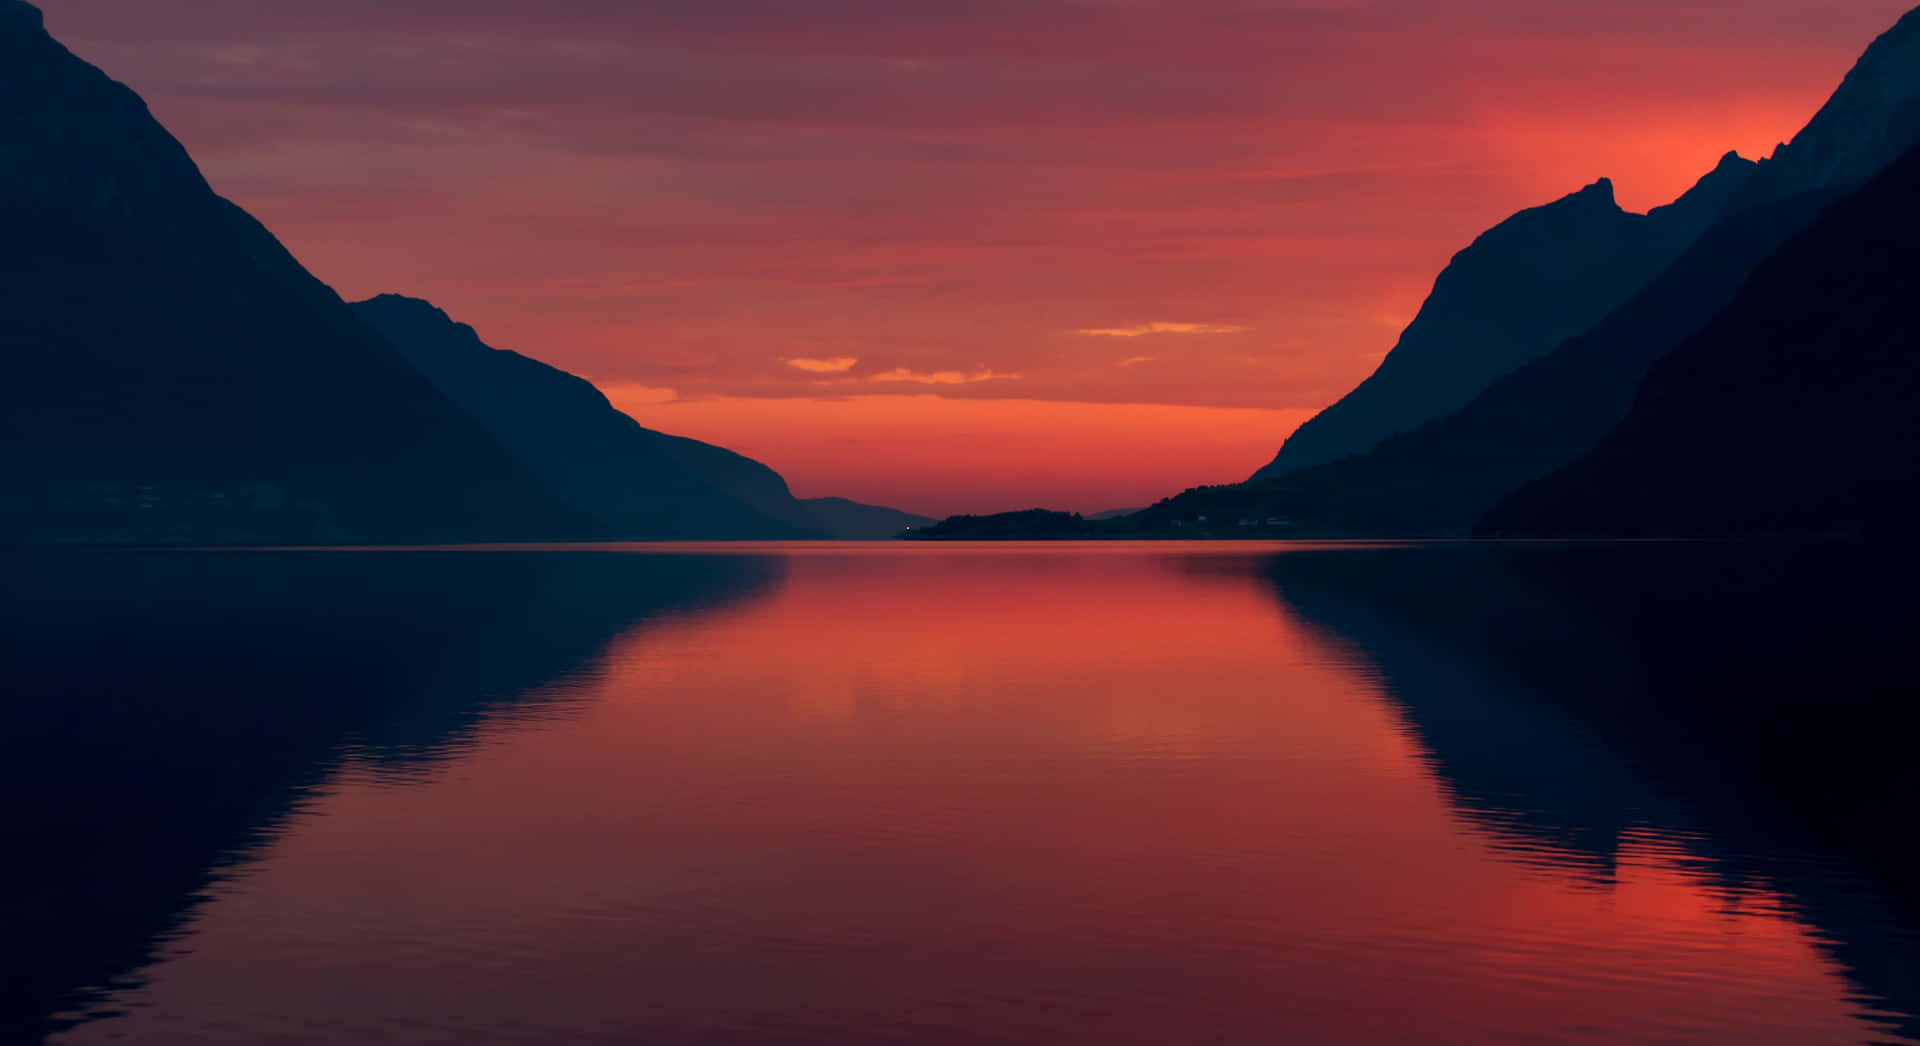 Body Of Water With Mountains Under Evening Sky Wallpaper